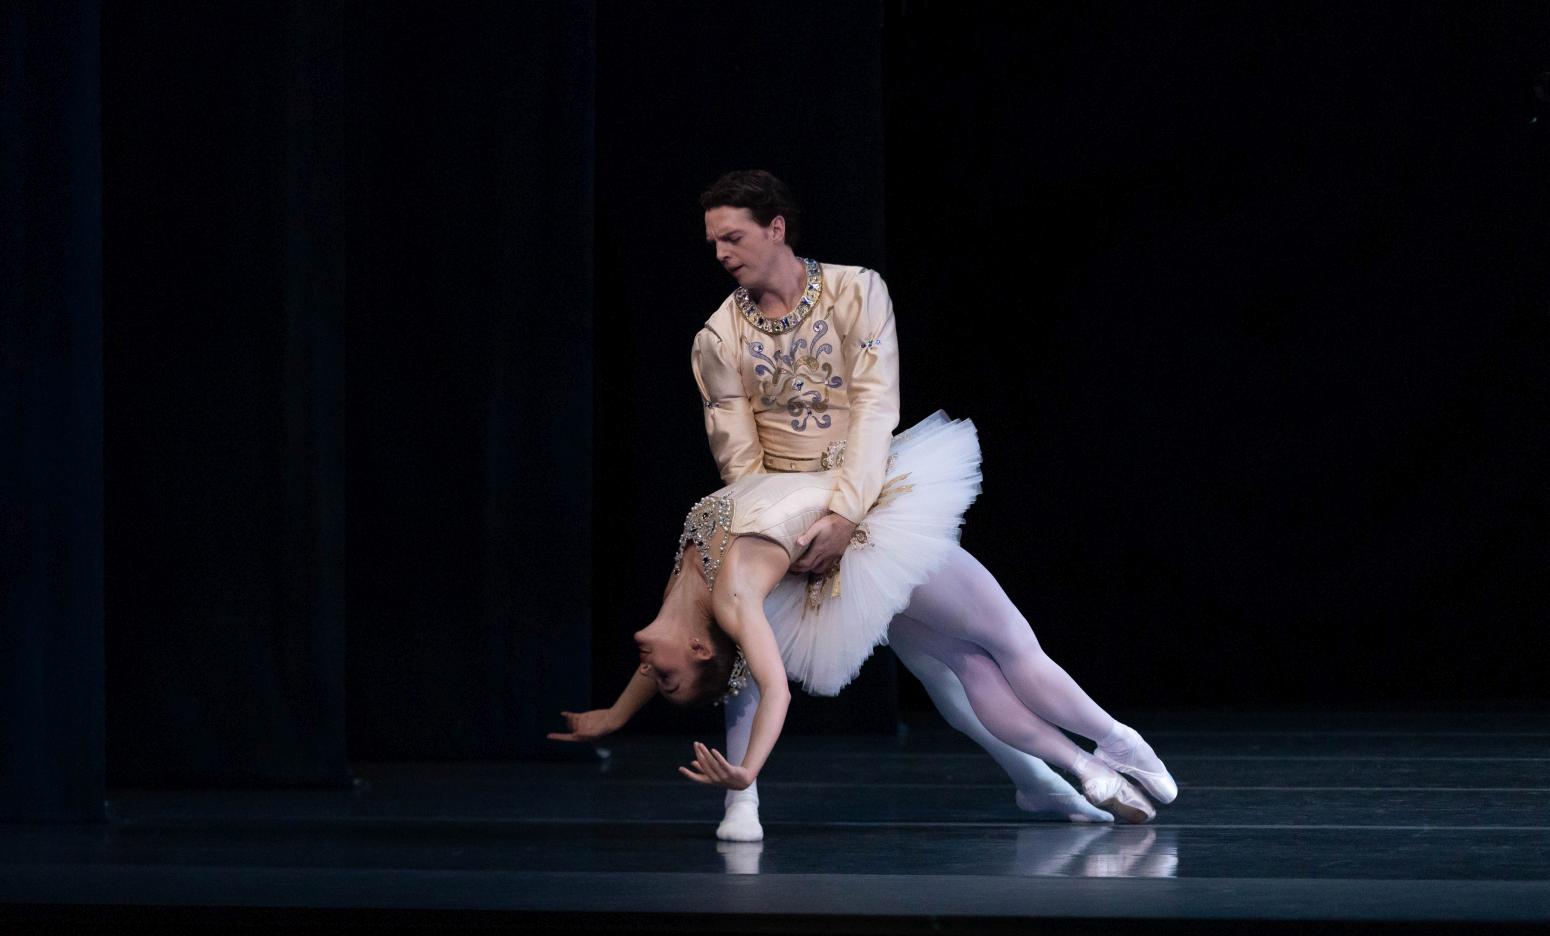 8. B.Bemet and J.Caley, “Jewels” by G.Balanchine, The Australian Ballet 2023 © R.Lantry 